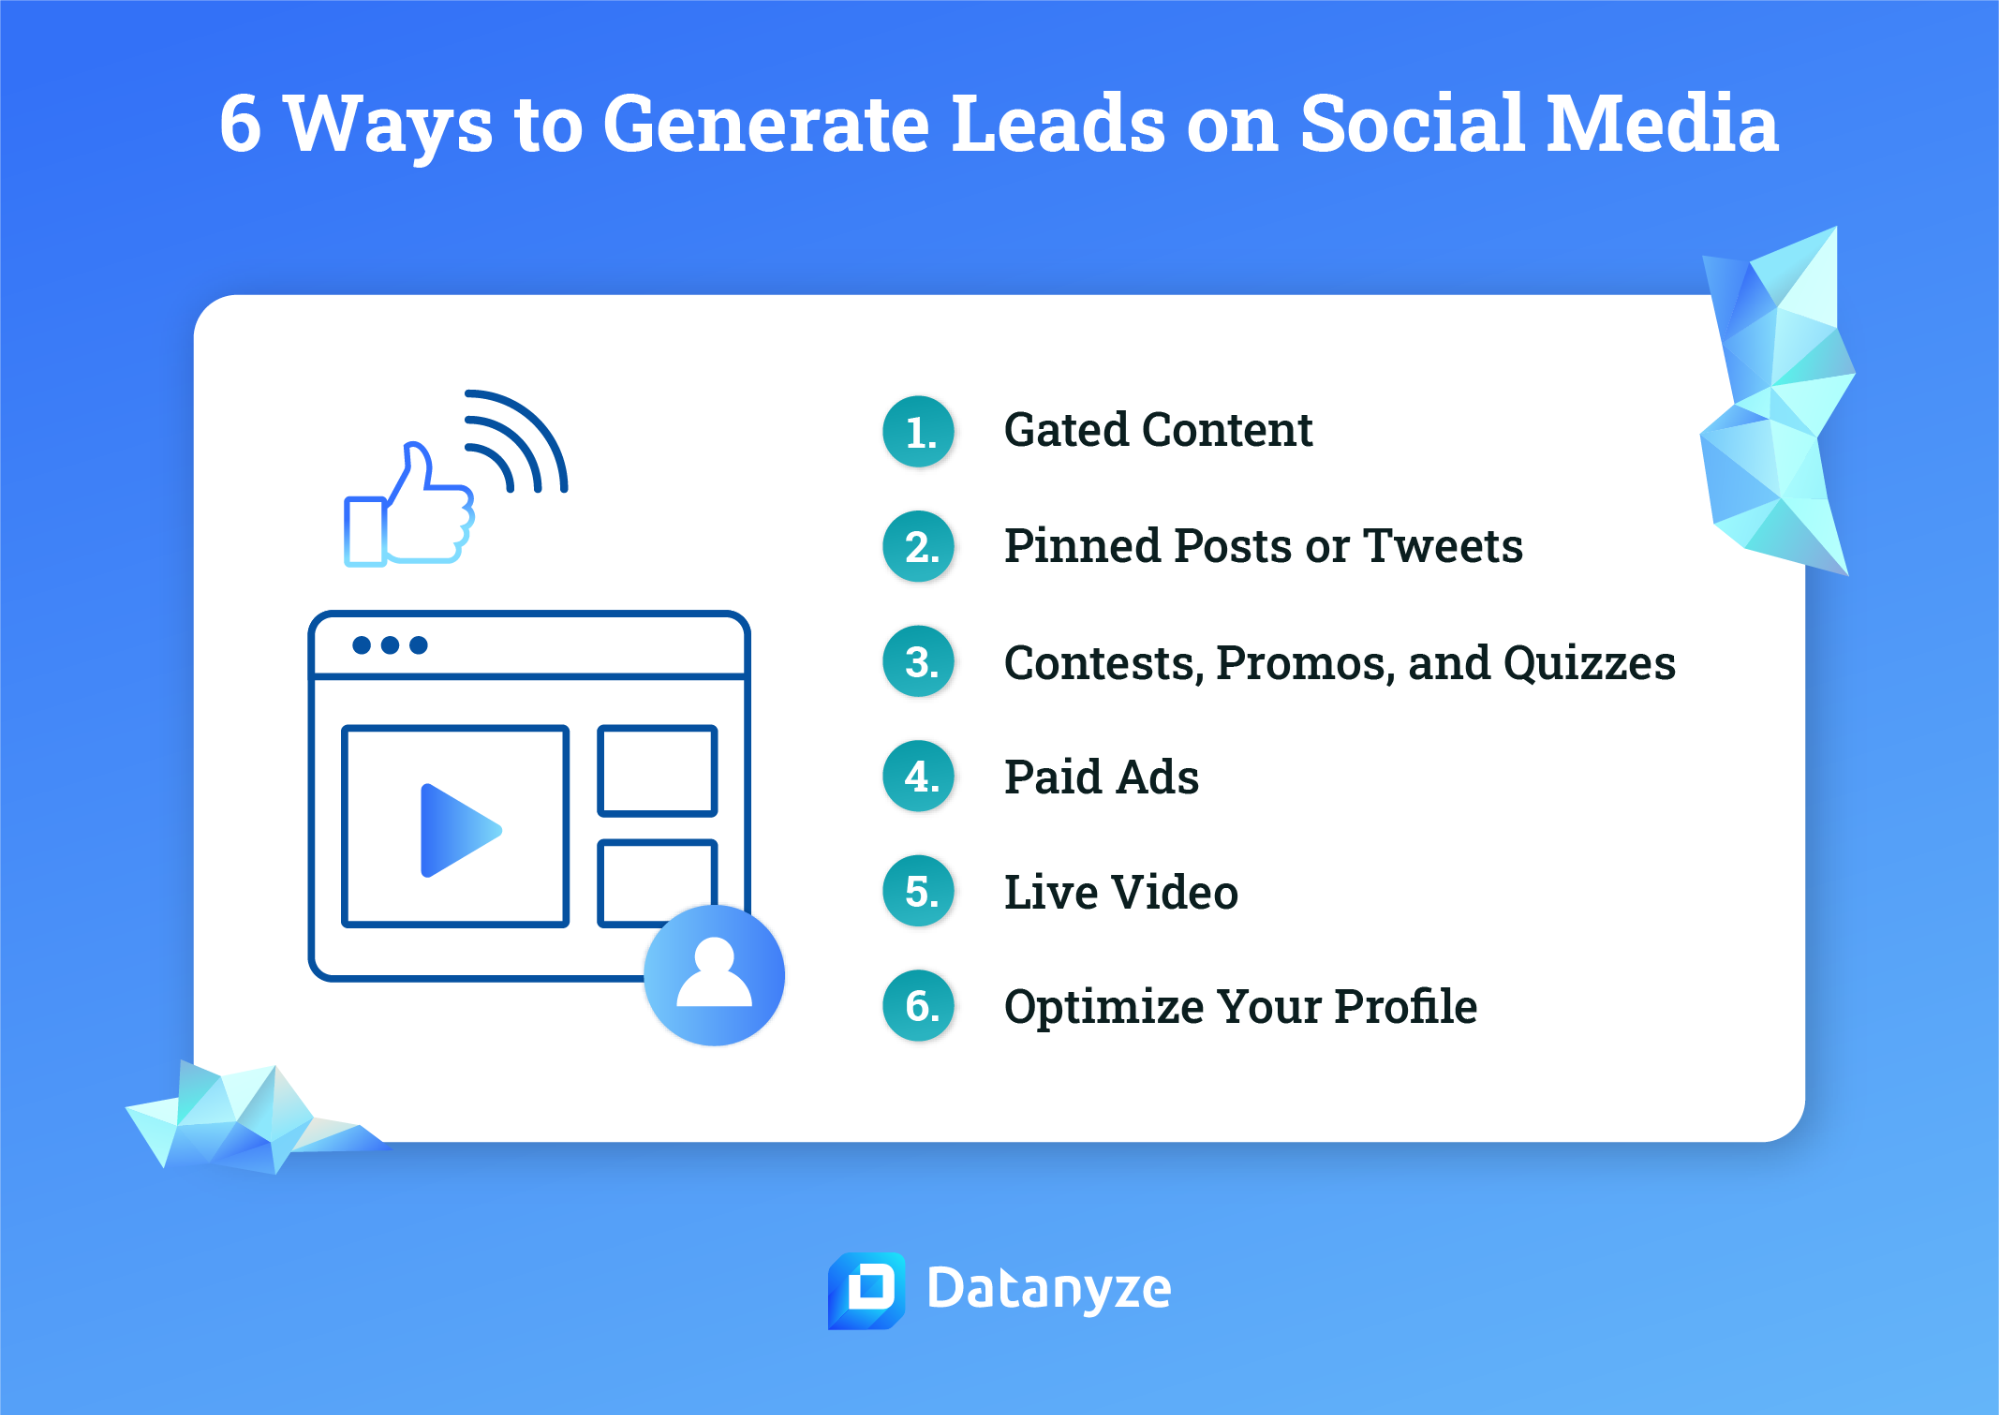 How to Generate Social Media Leads